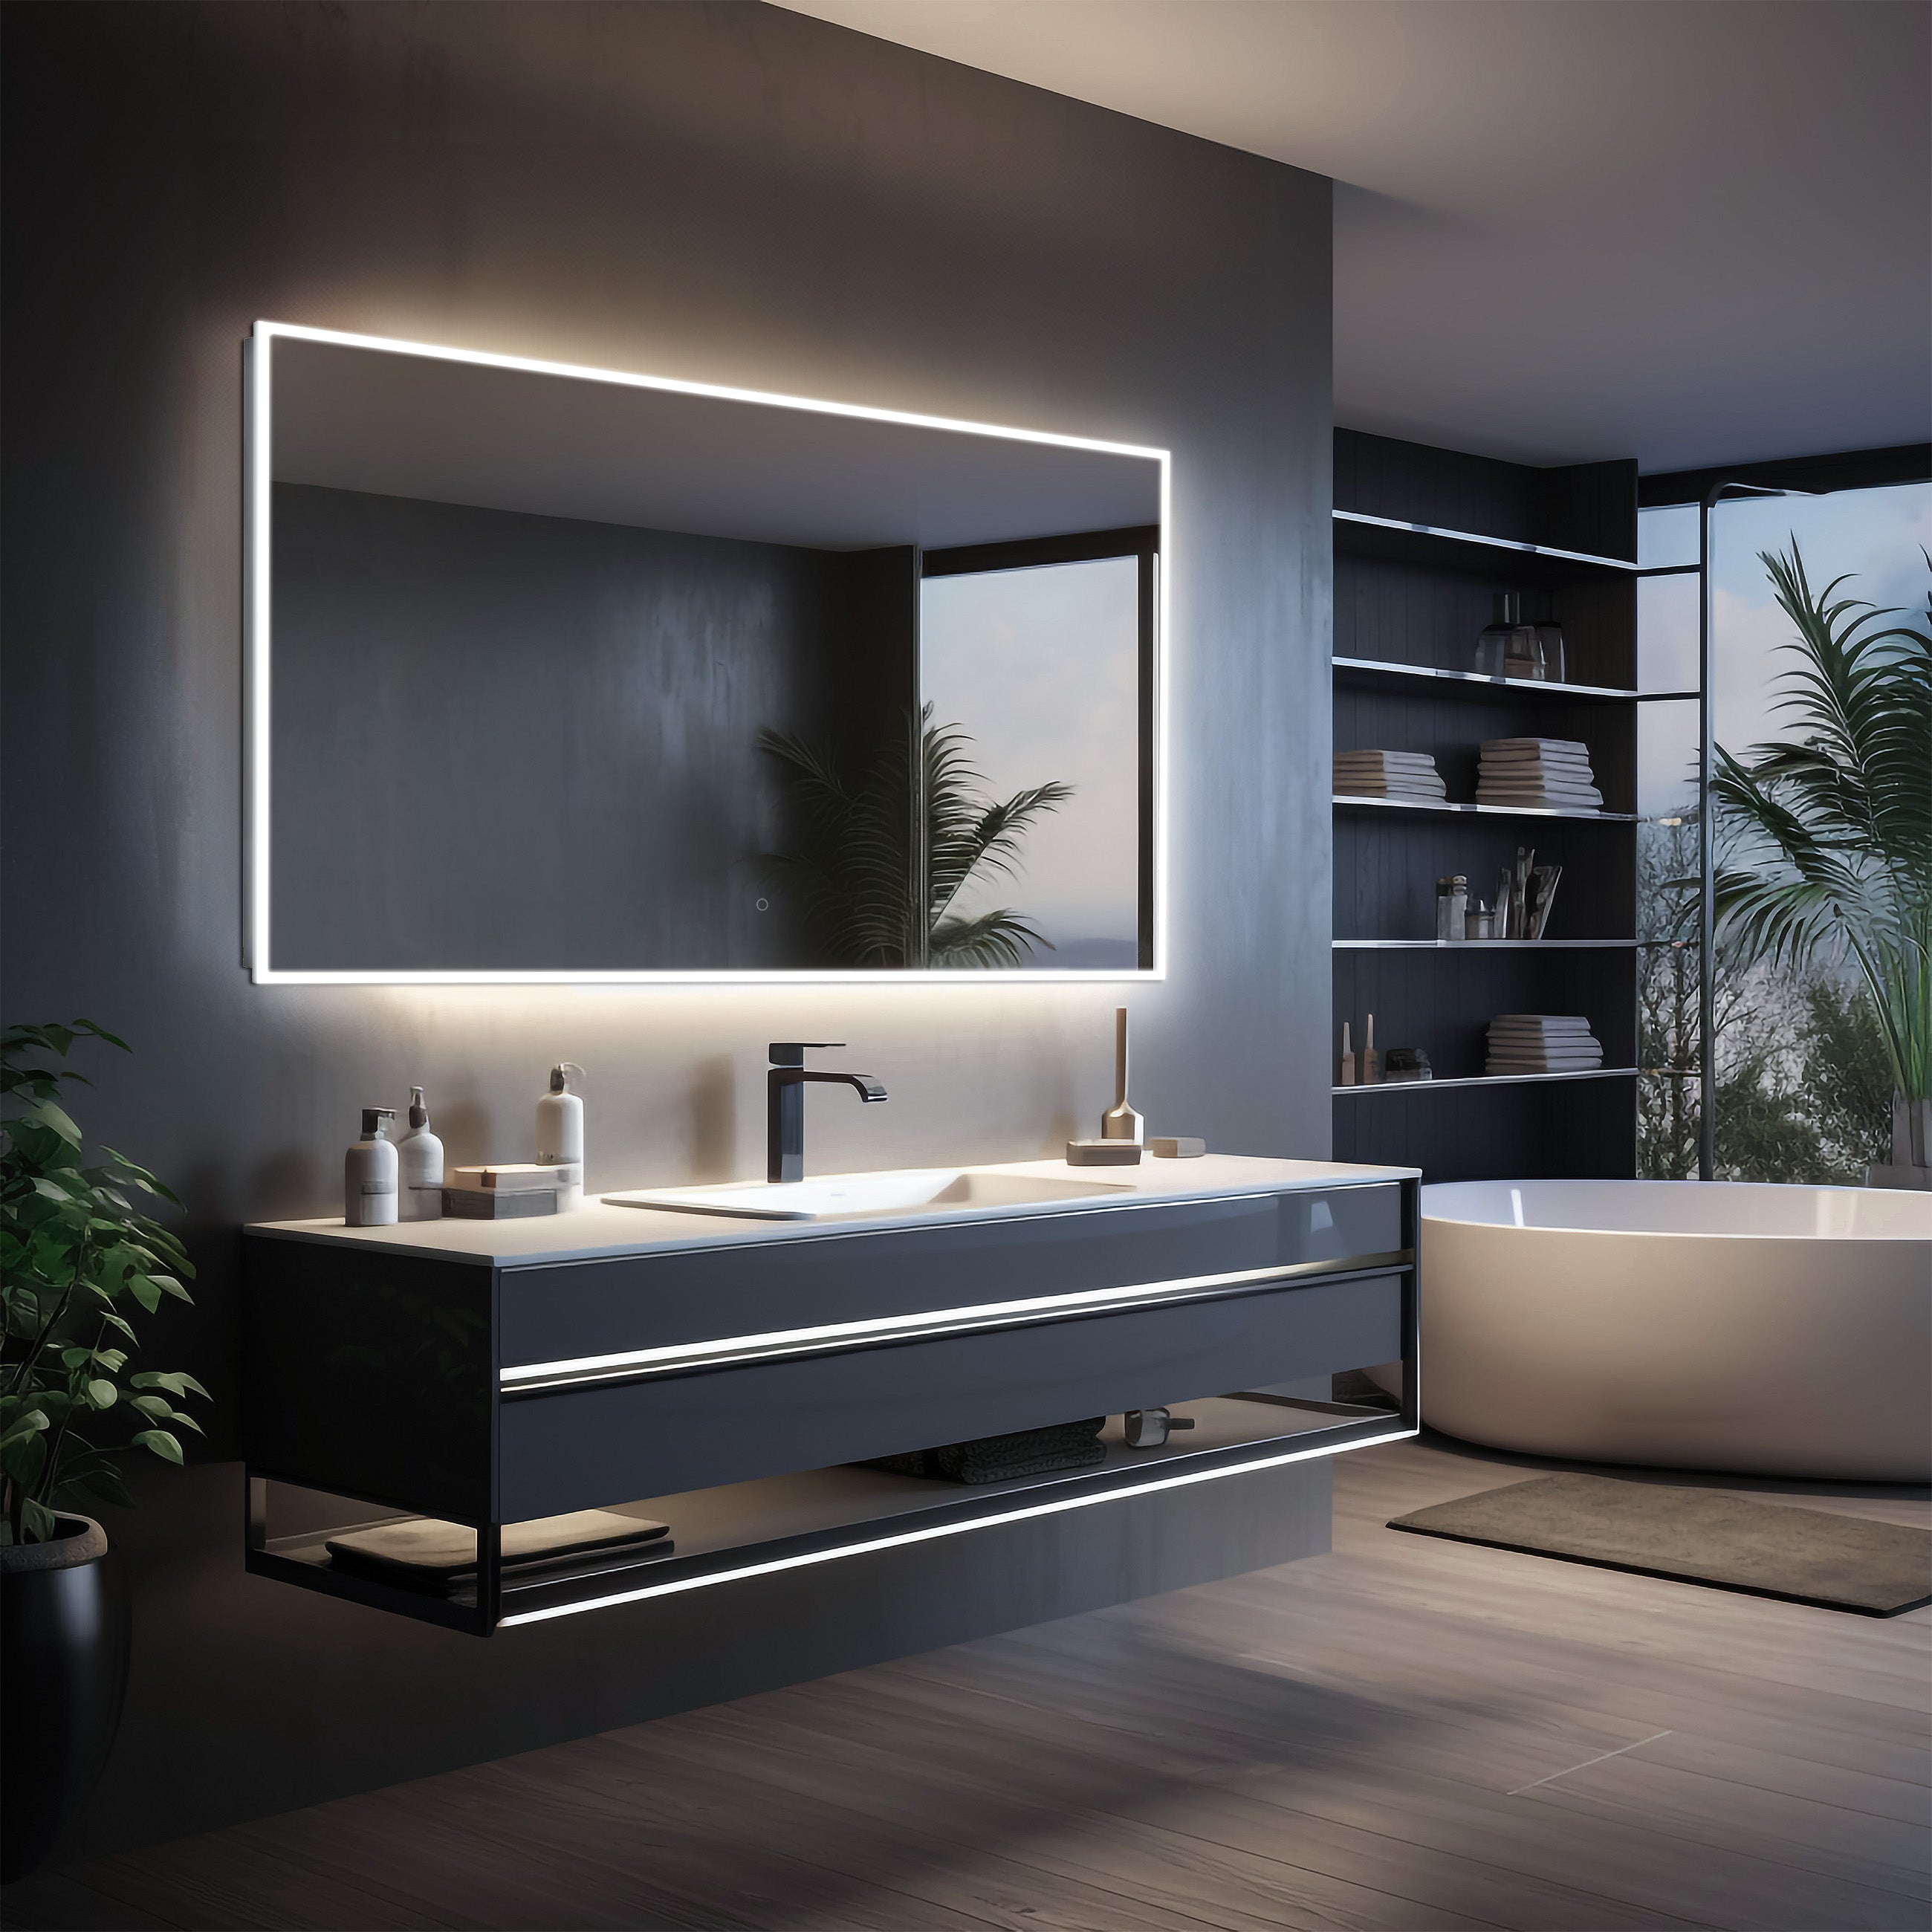 Camila Frameless LED Mirror with Defogger and Integrated Touch Switch - Available in 4 Sizes